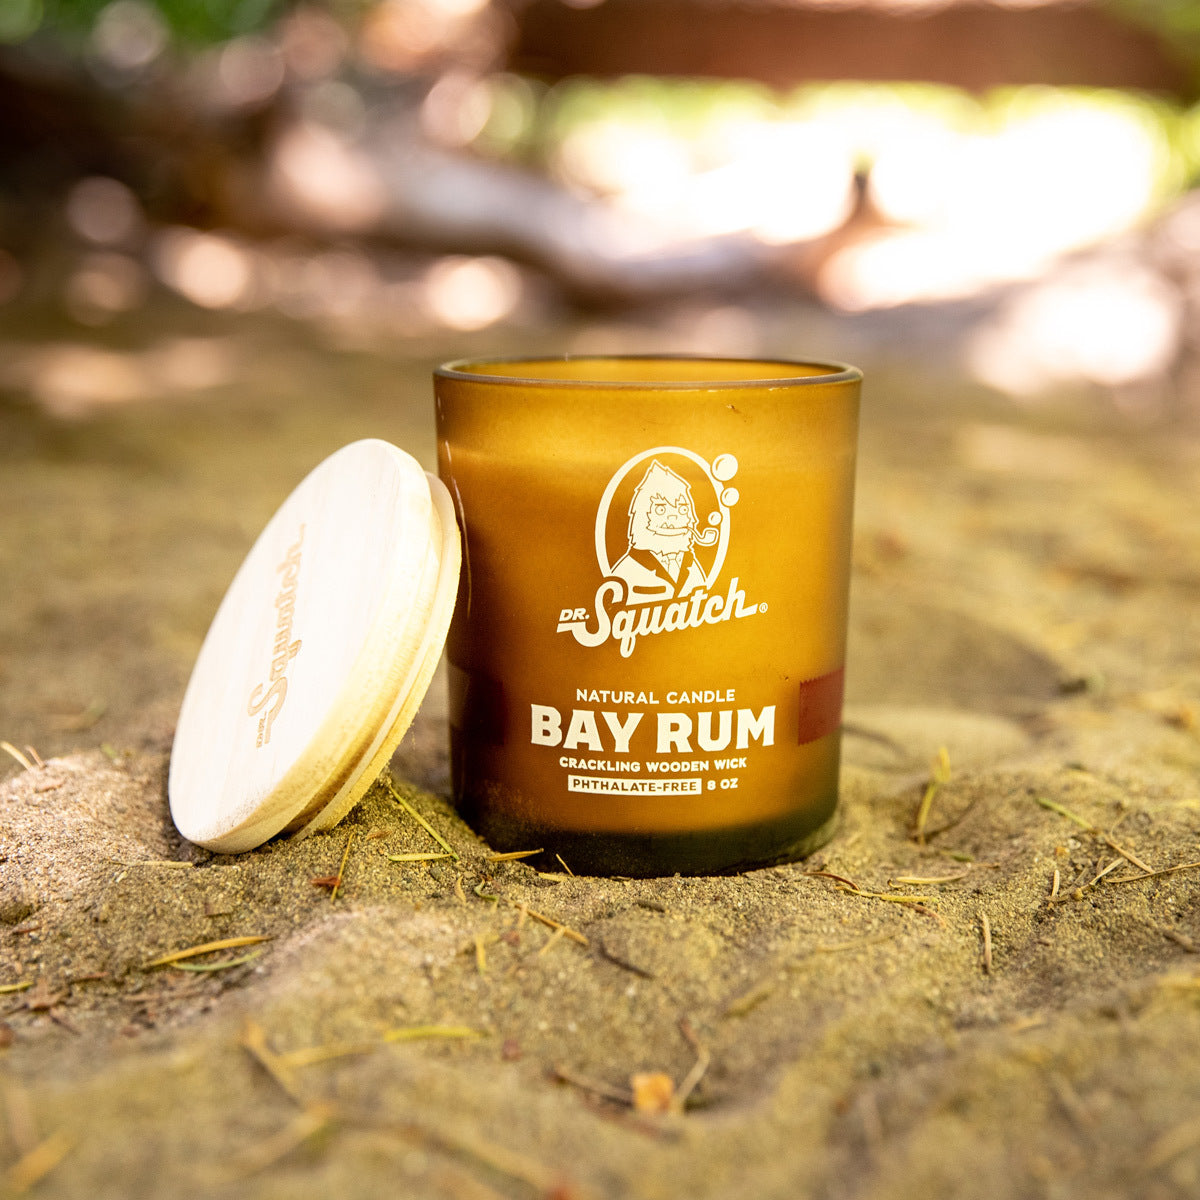 Dr. Squatch Bay Rum Candle